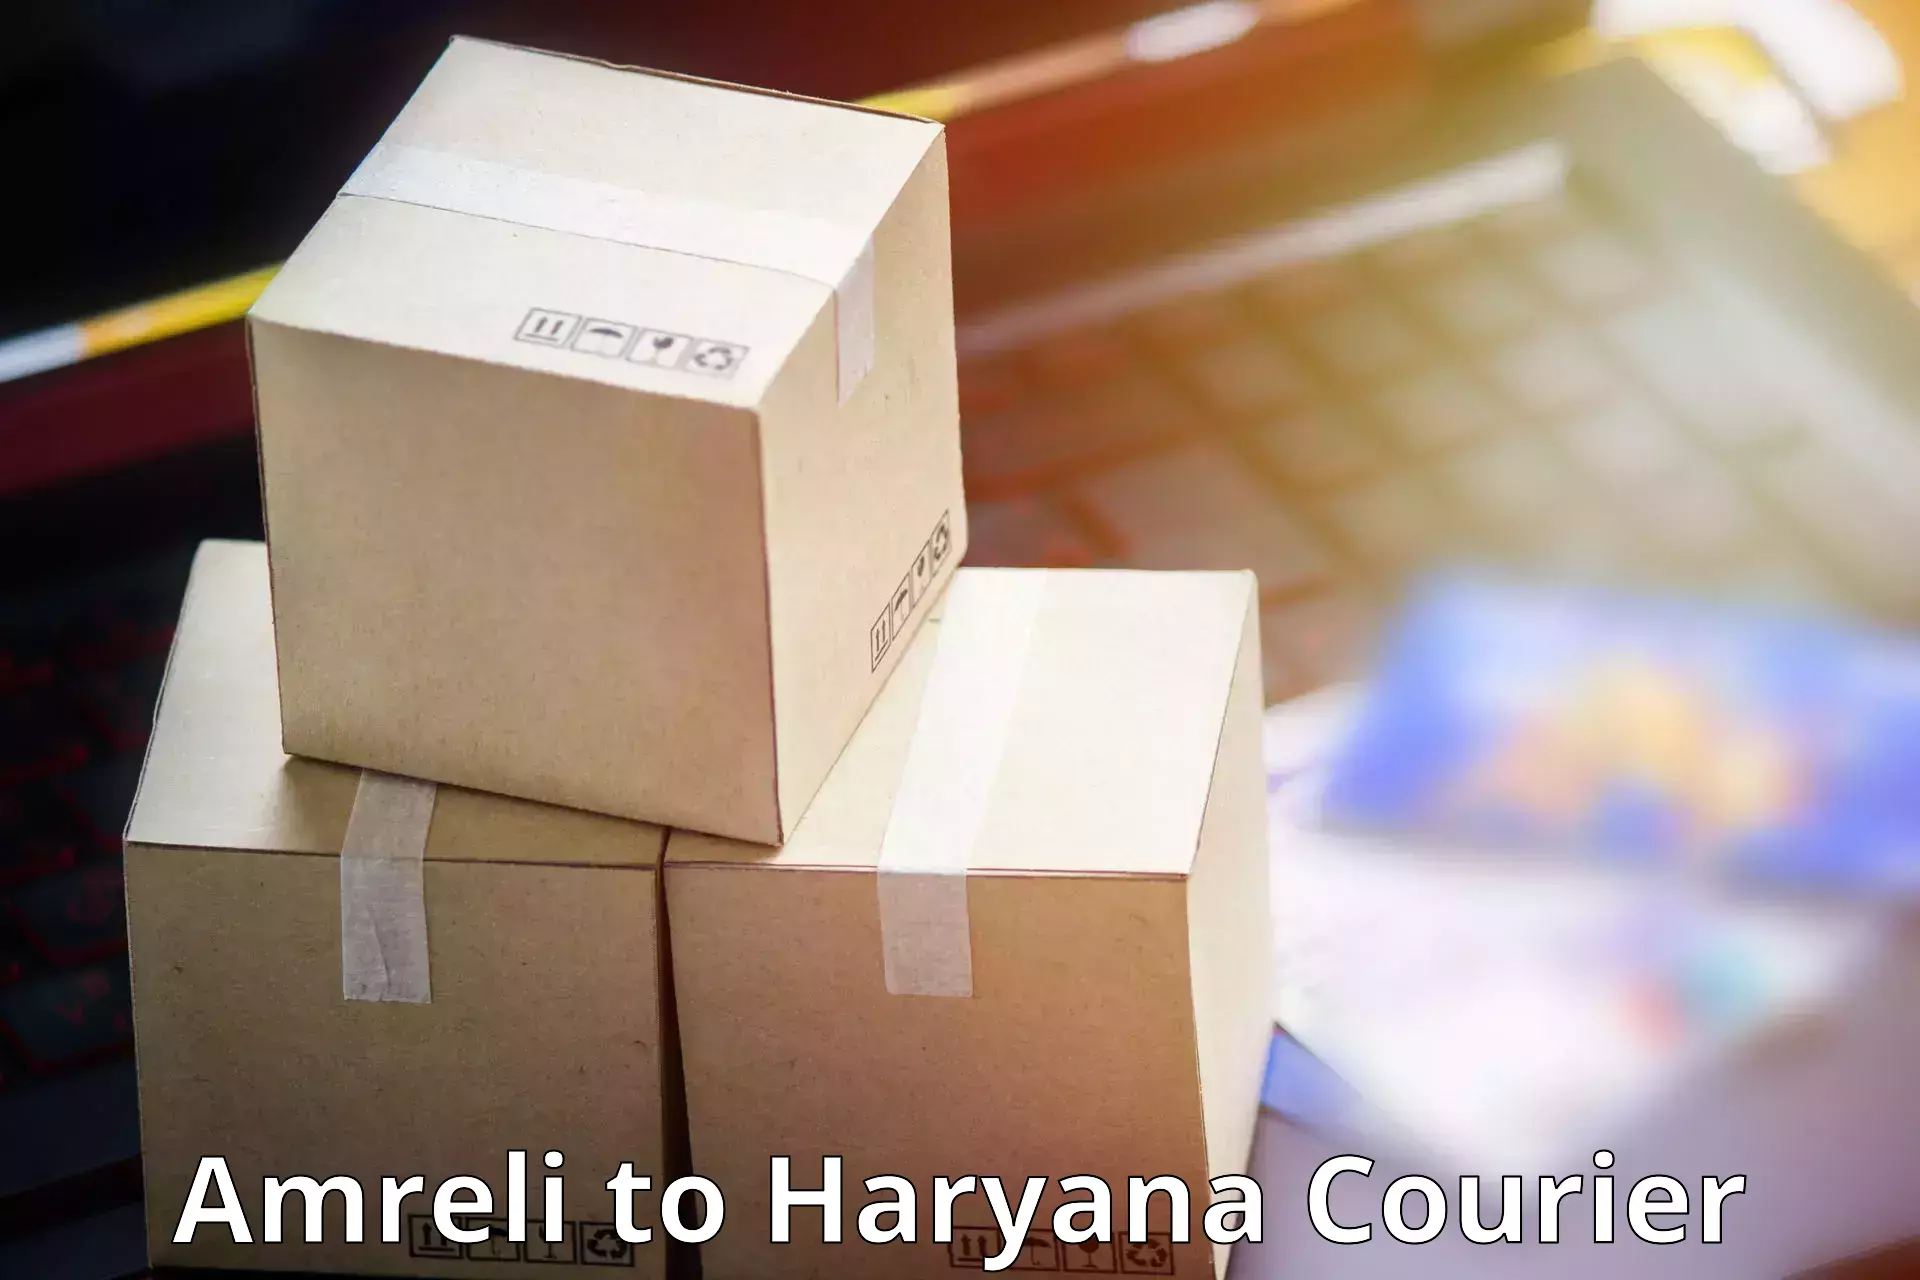 Quality courier services Amreli to Gurgaon